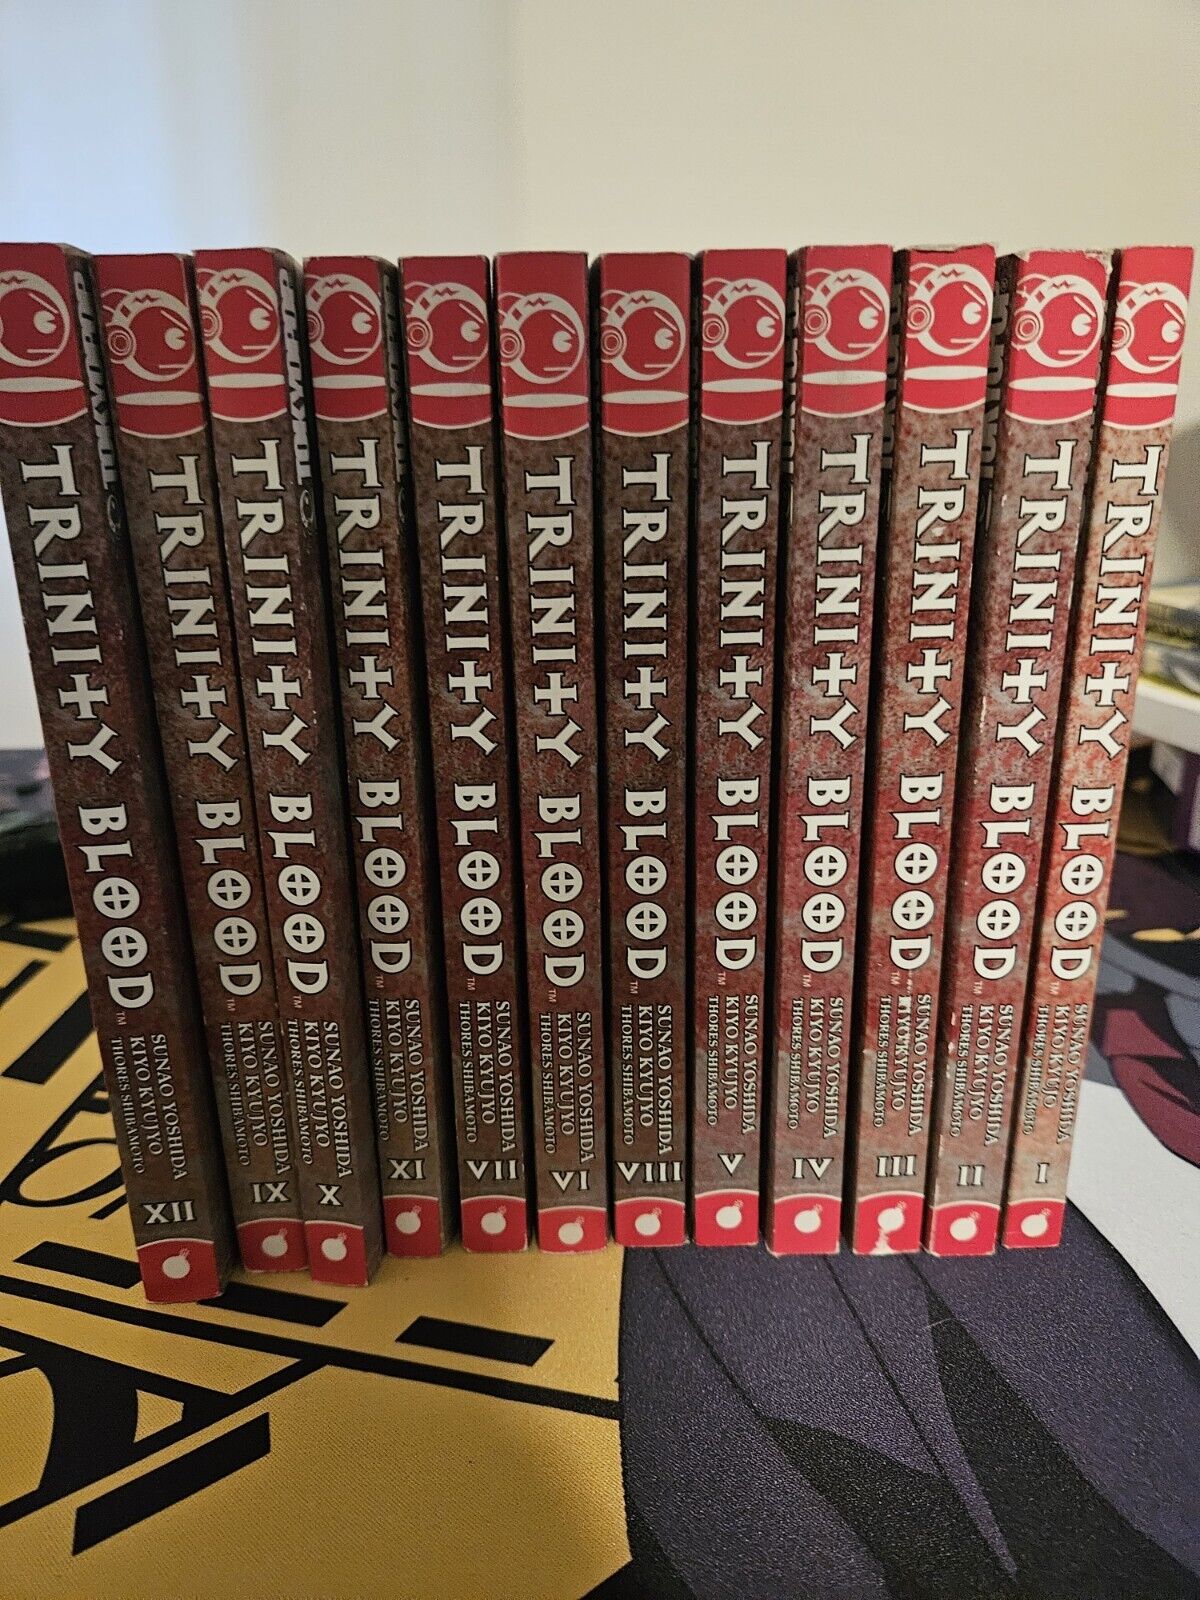 Trinity Blood Mangas 1-12 English Tokyopop Complete Series 